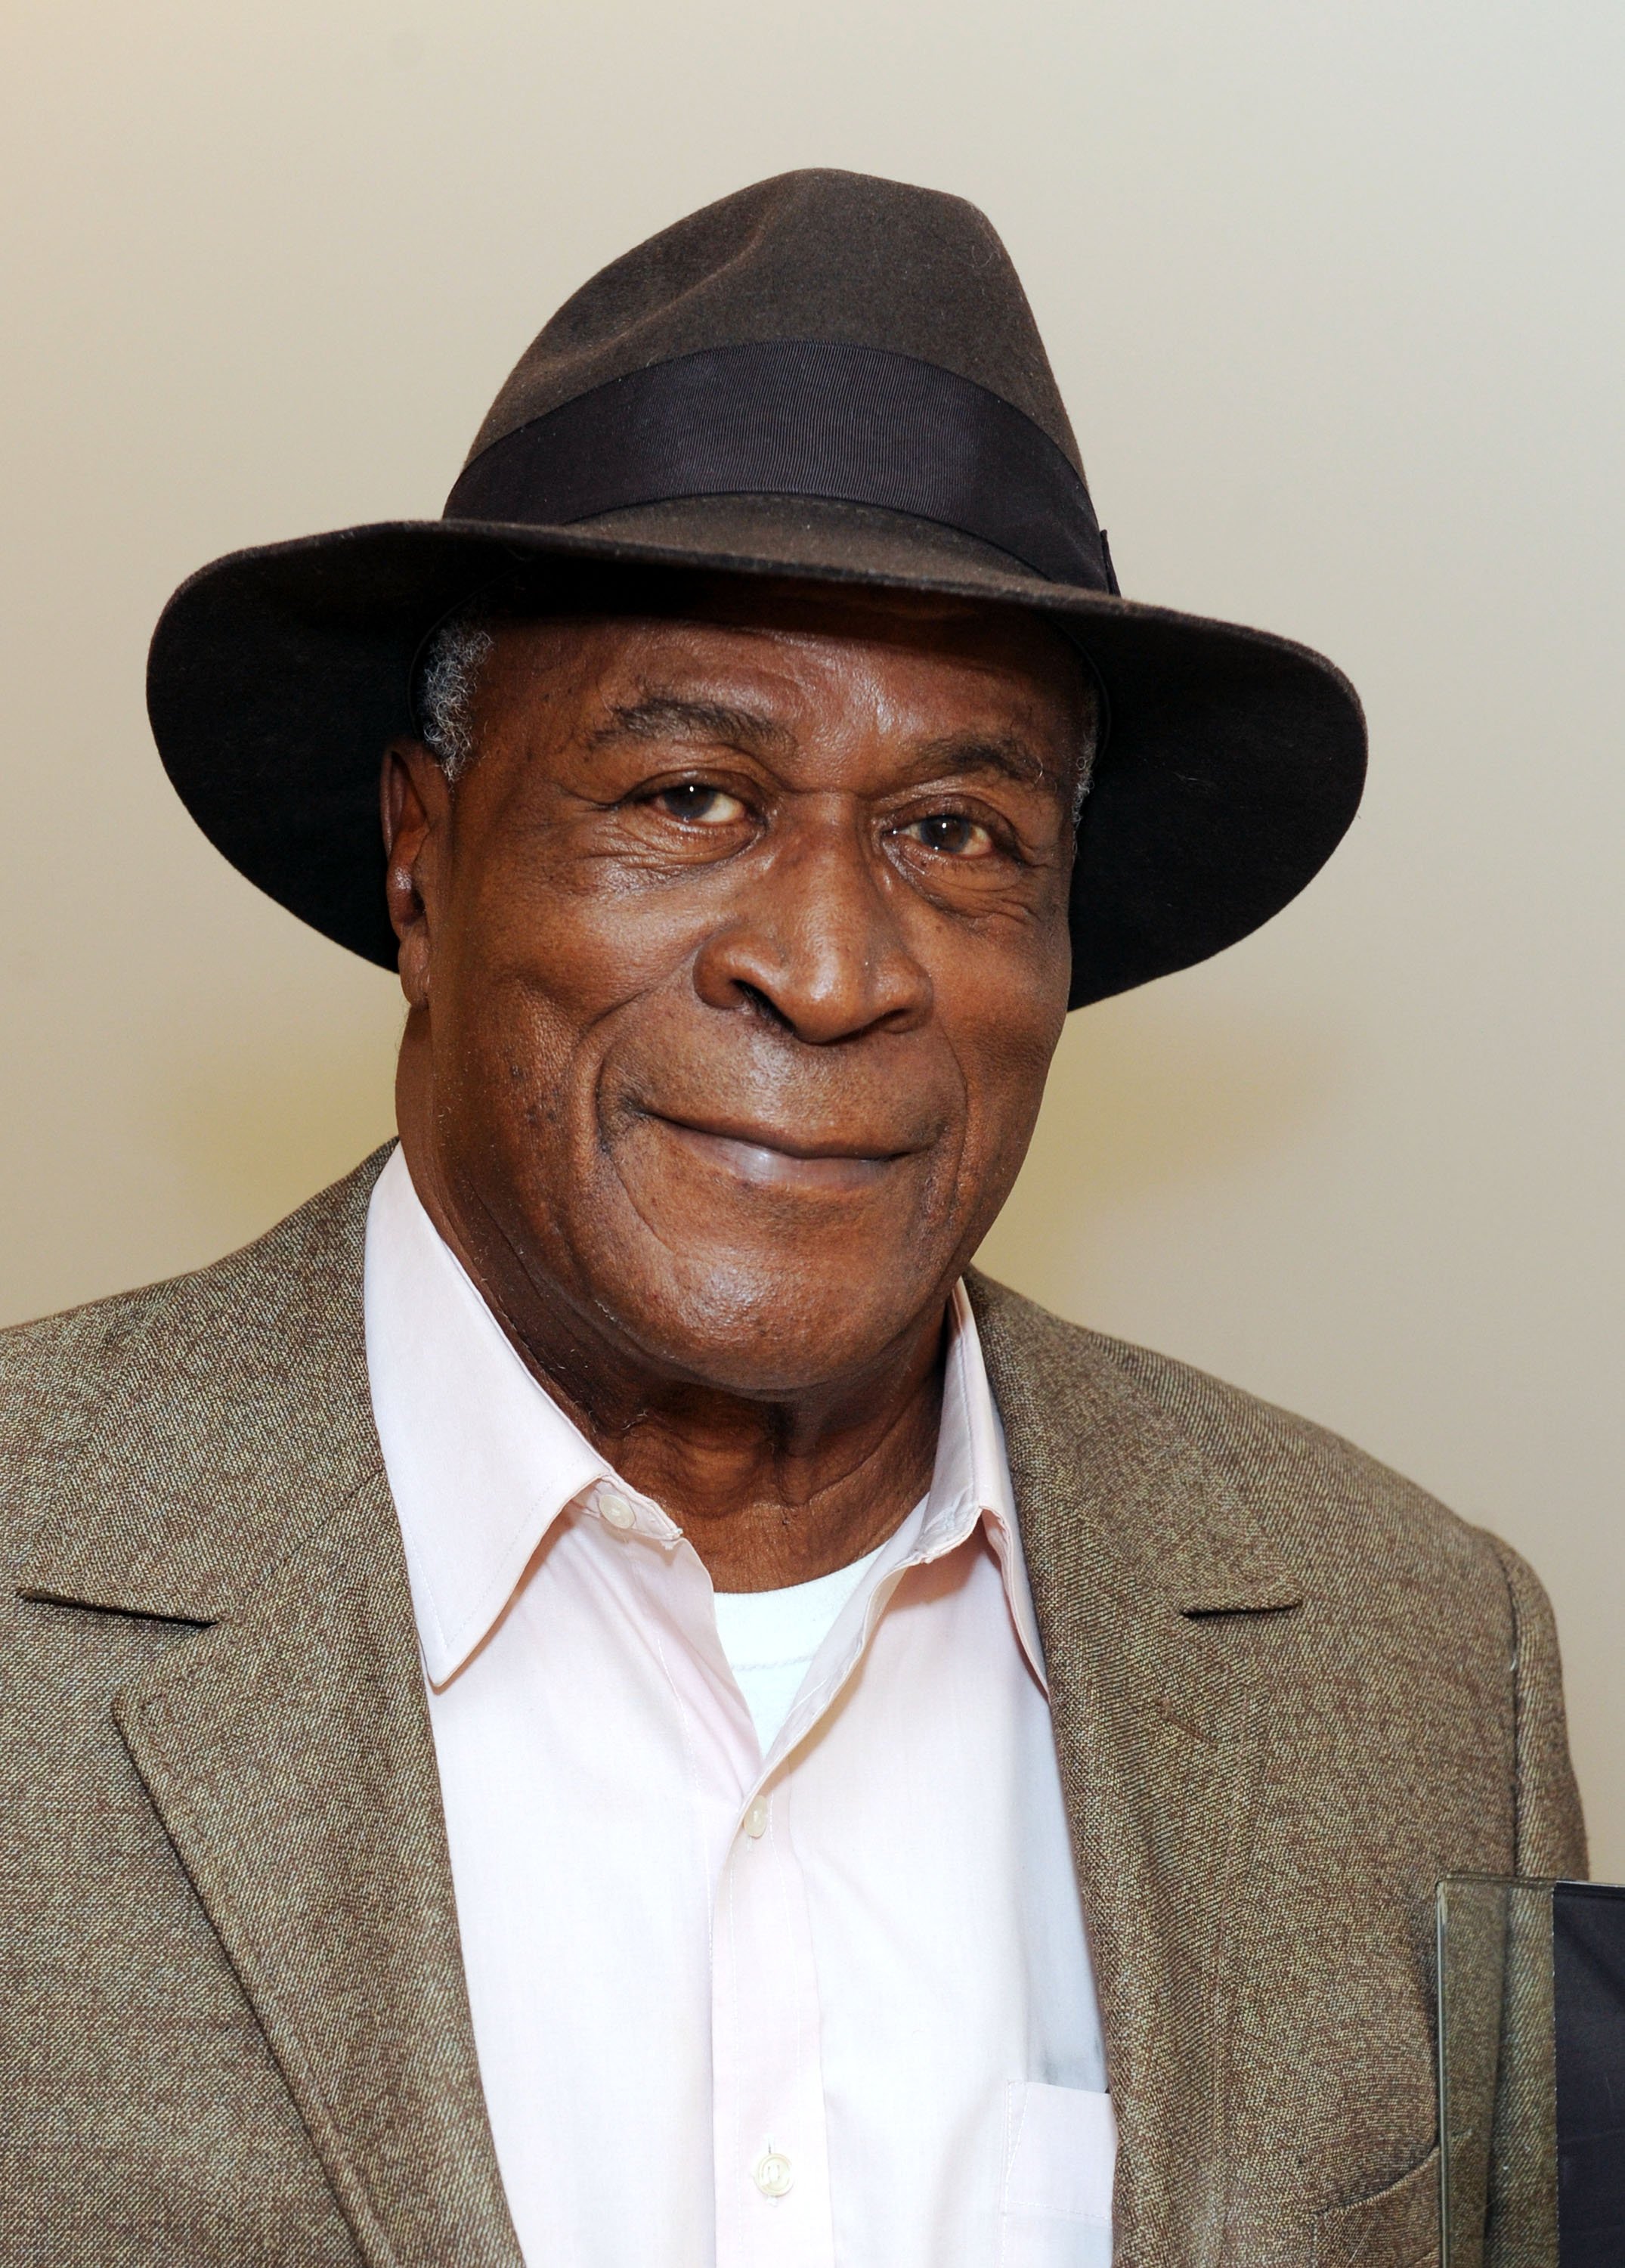 John Amos during the Althea screening and panel discussion at One Time Warner Center on October 5, 2015, in New York City. | Source: Getty Images